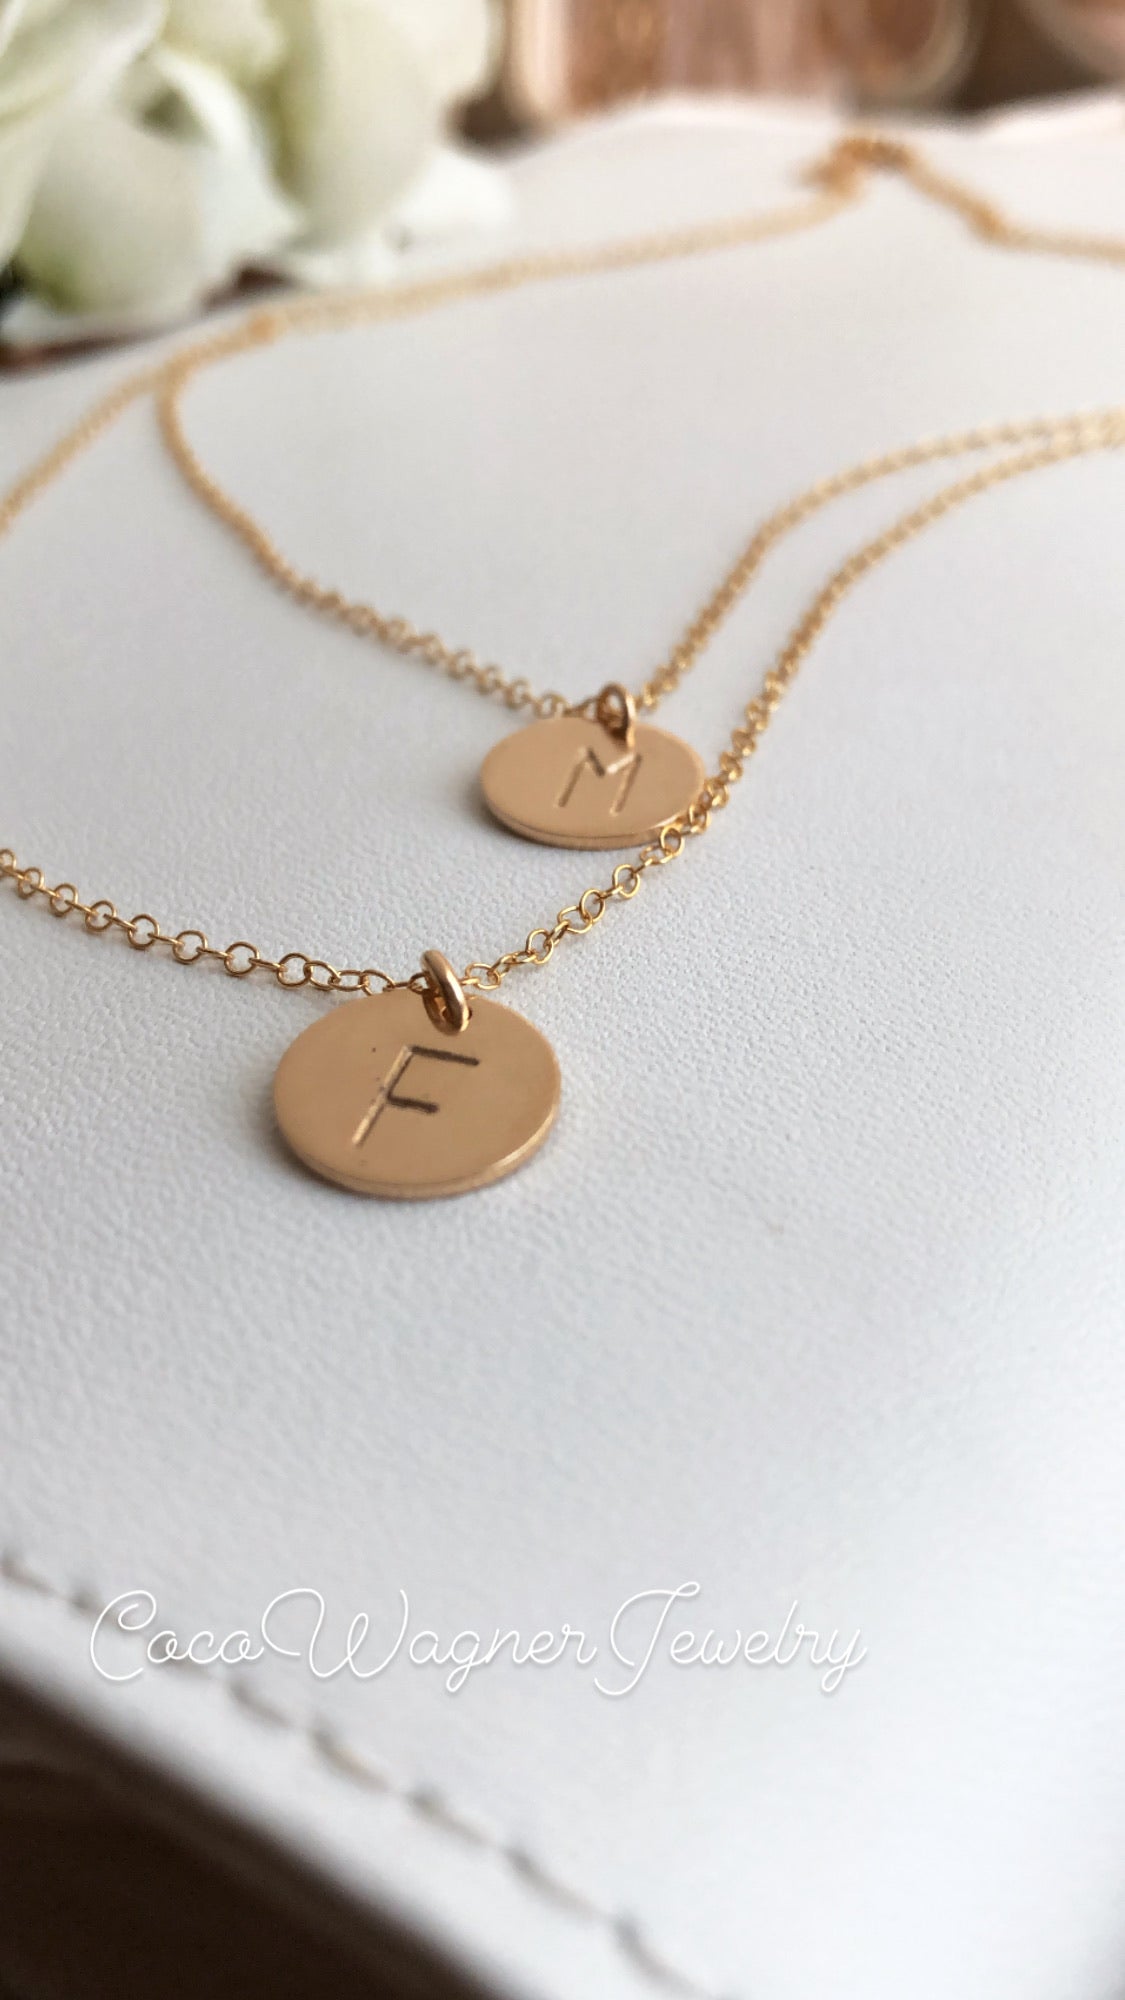 Monogram and Name. Simple and Dainty Personalized bar, Birthstone necklace, Gold Bar Necklace, Birthstone Jewelry, Natural Stone Gift for mom, Bar necklace, Custom coordinates, coordinates, latitude longitude coordinates, Initial Necklace, Name Necklace, Personalized,  Custom Name Necklace, Minimalist necklace, Geometric Necklace,  layering necklace, simple necklace, Everyday Necklace, Layering Jewelry, laye